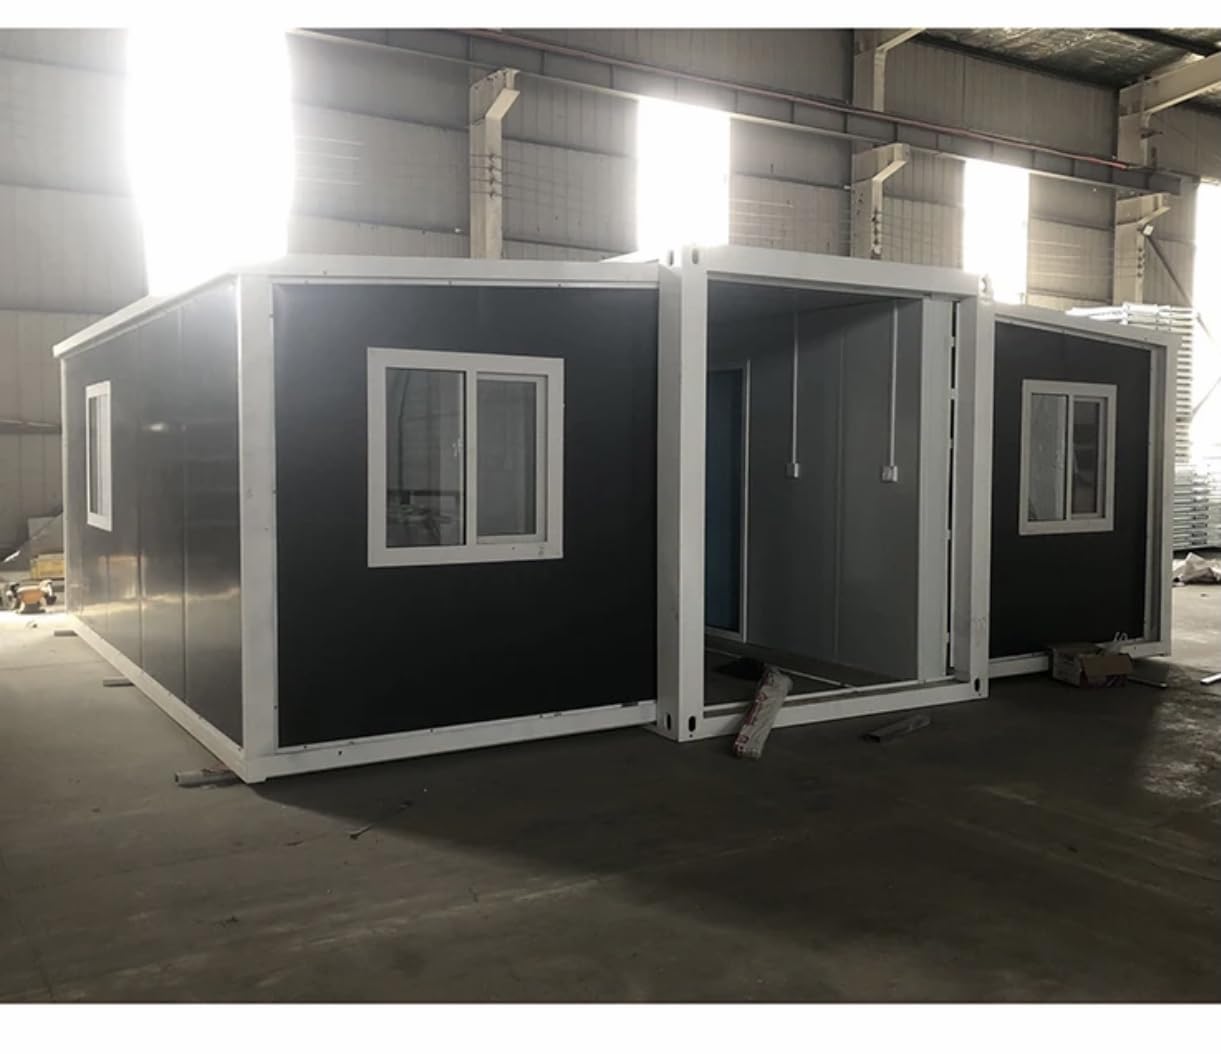 20 ft Prefabricated Home Office Building Kit, Standard Pre-Engineered Design, Floor Plans and Specs Included